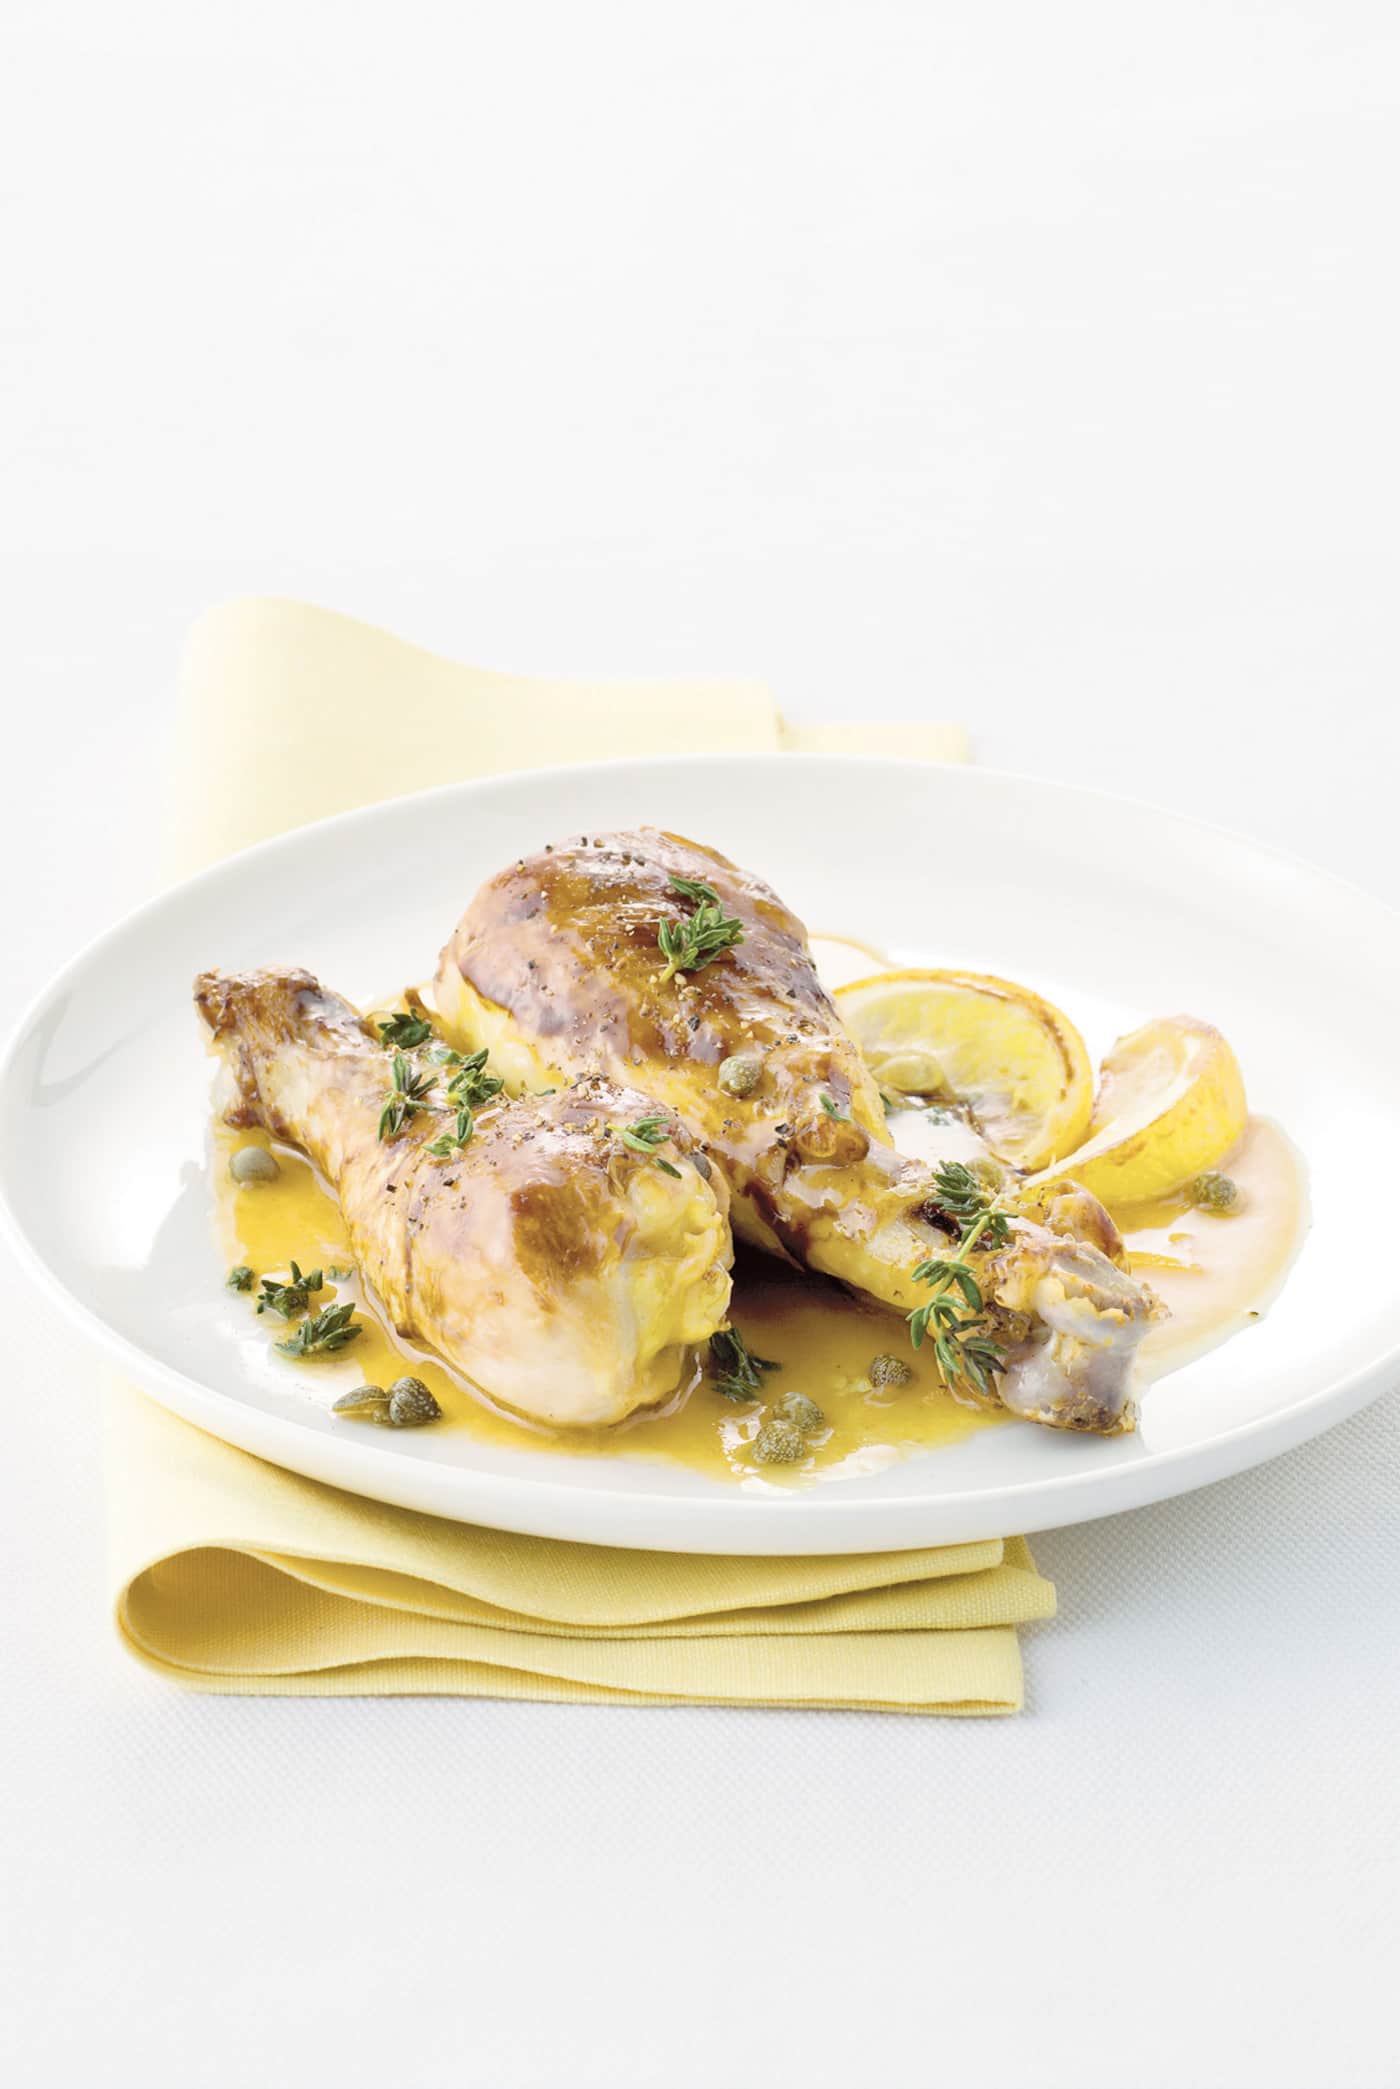 Cooking chicken thighs: 10 quick recipes